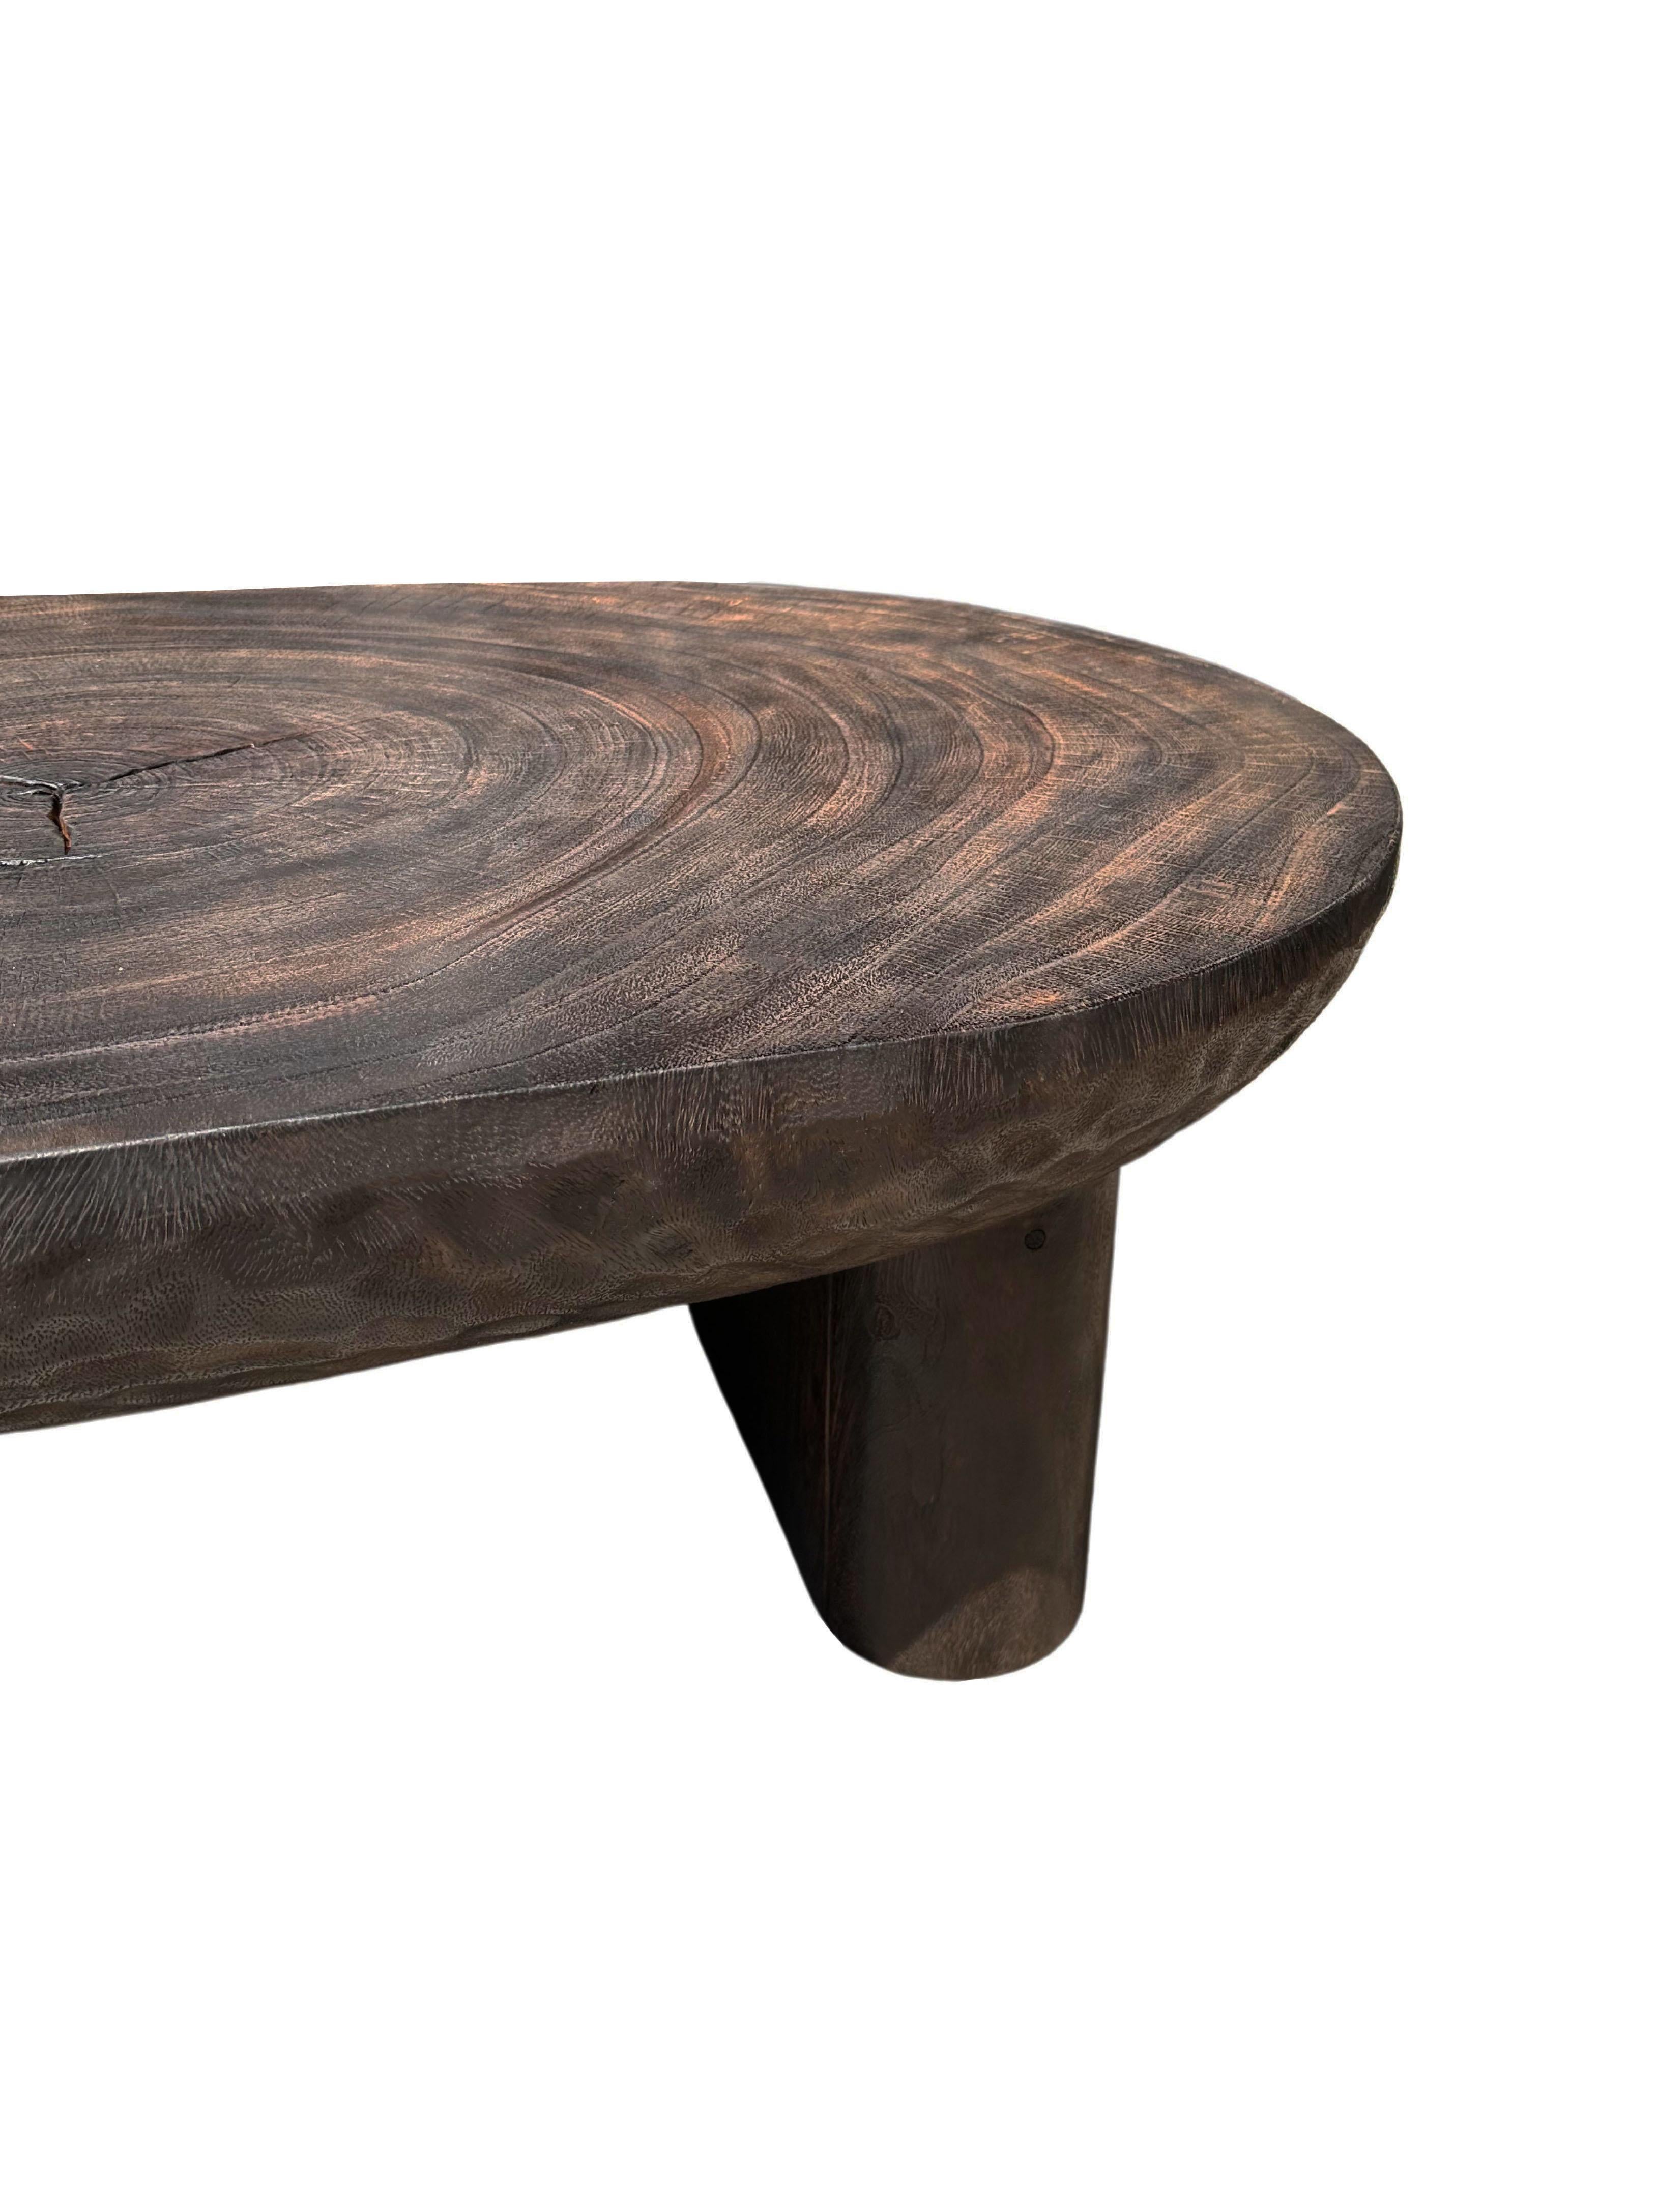 Suar Wood Table Hand-Hewn Detailing Espresso Finish, Modern Organic In New Condition For Sale In Jimbaran, Bali